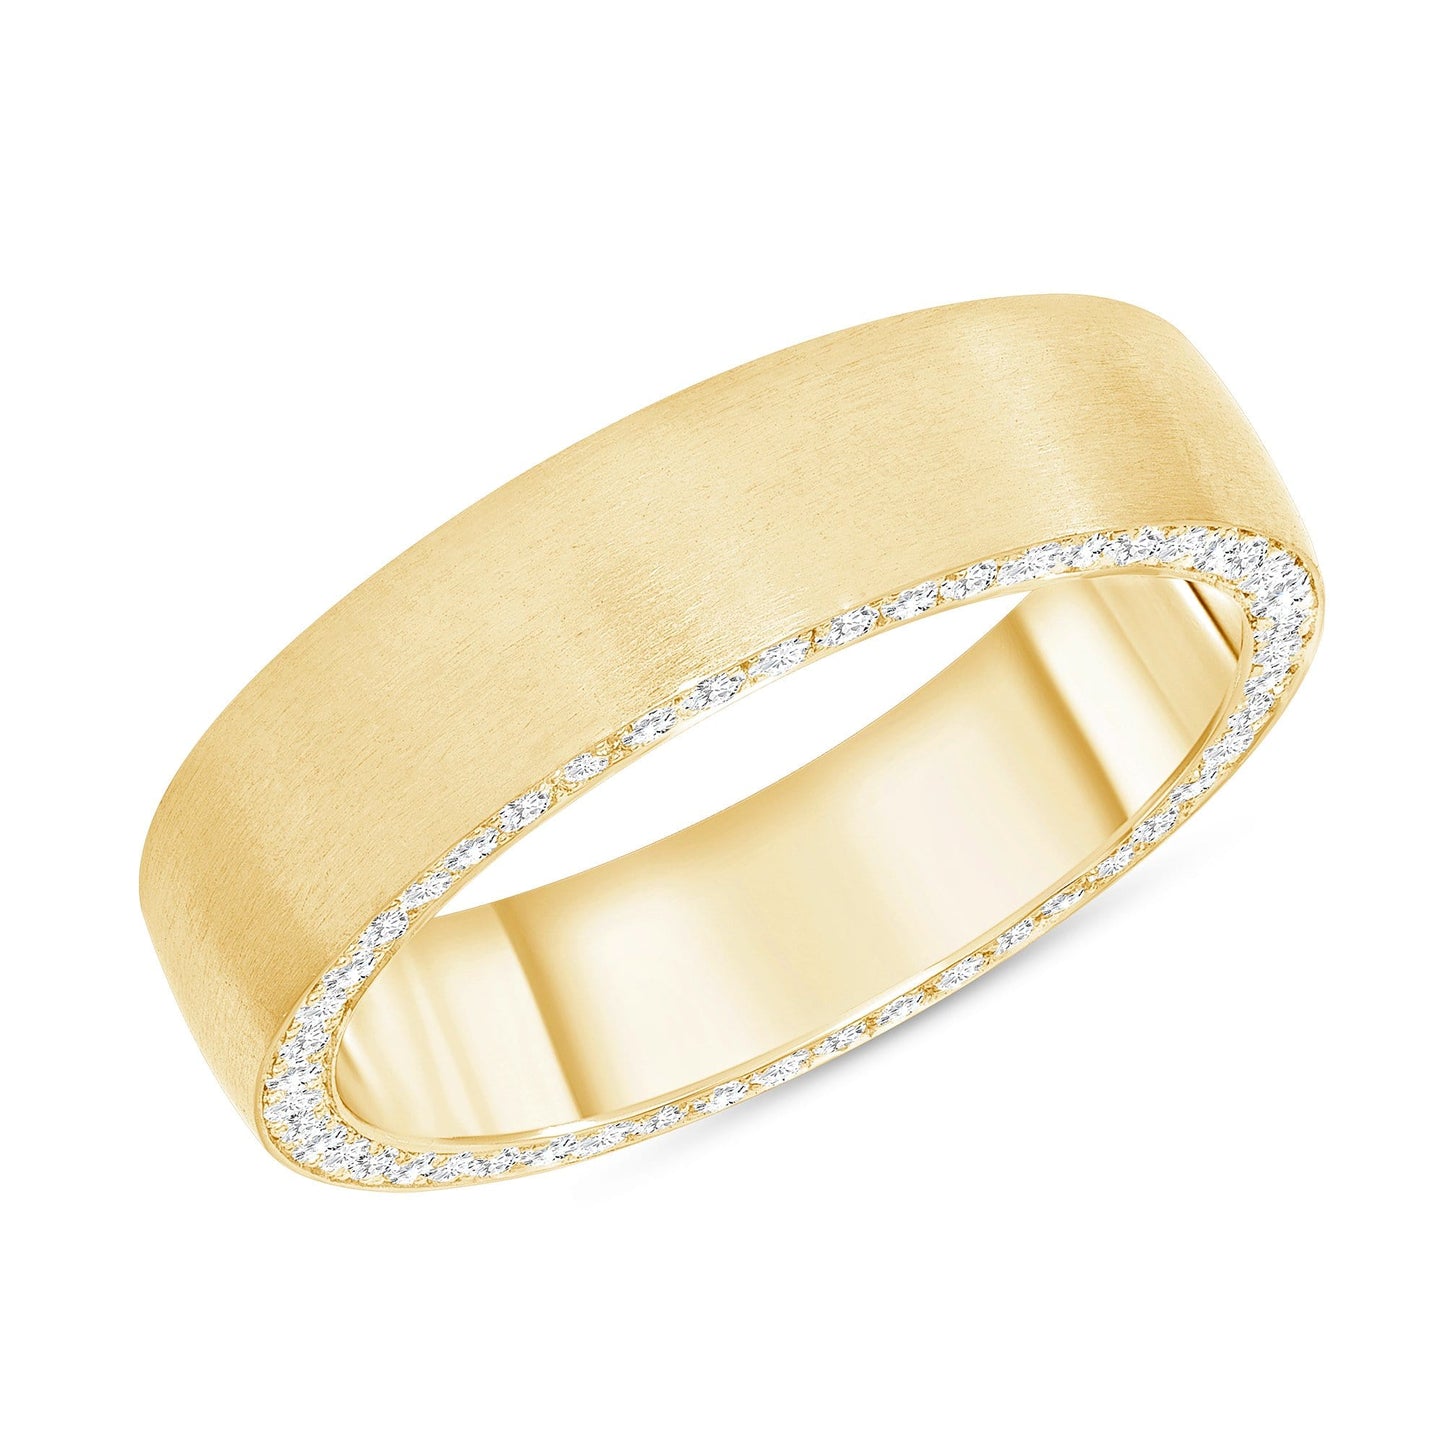 Load image into Gallery viewer, The Charles Band - Happy Jewelers Fine Jewelry Lifetime Warranty
